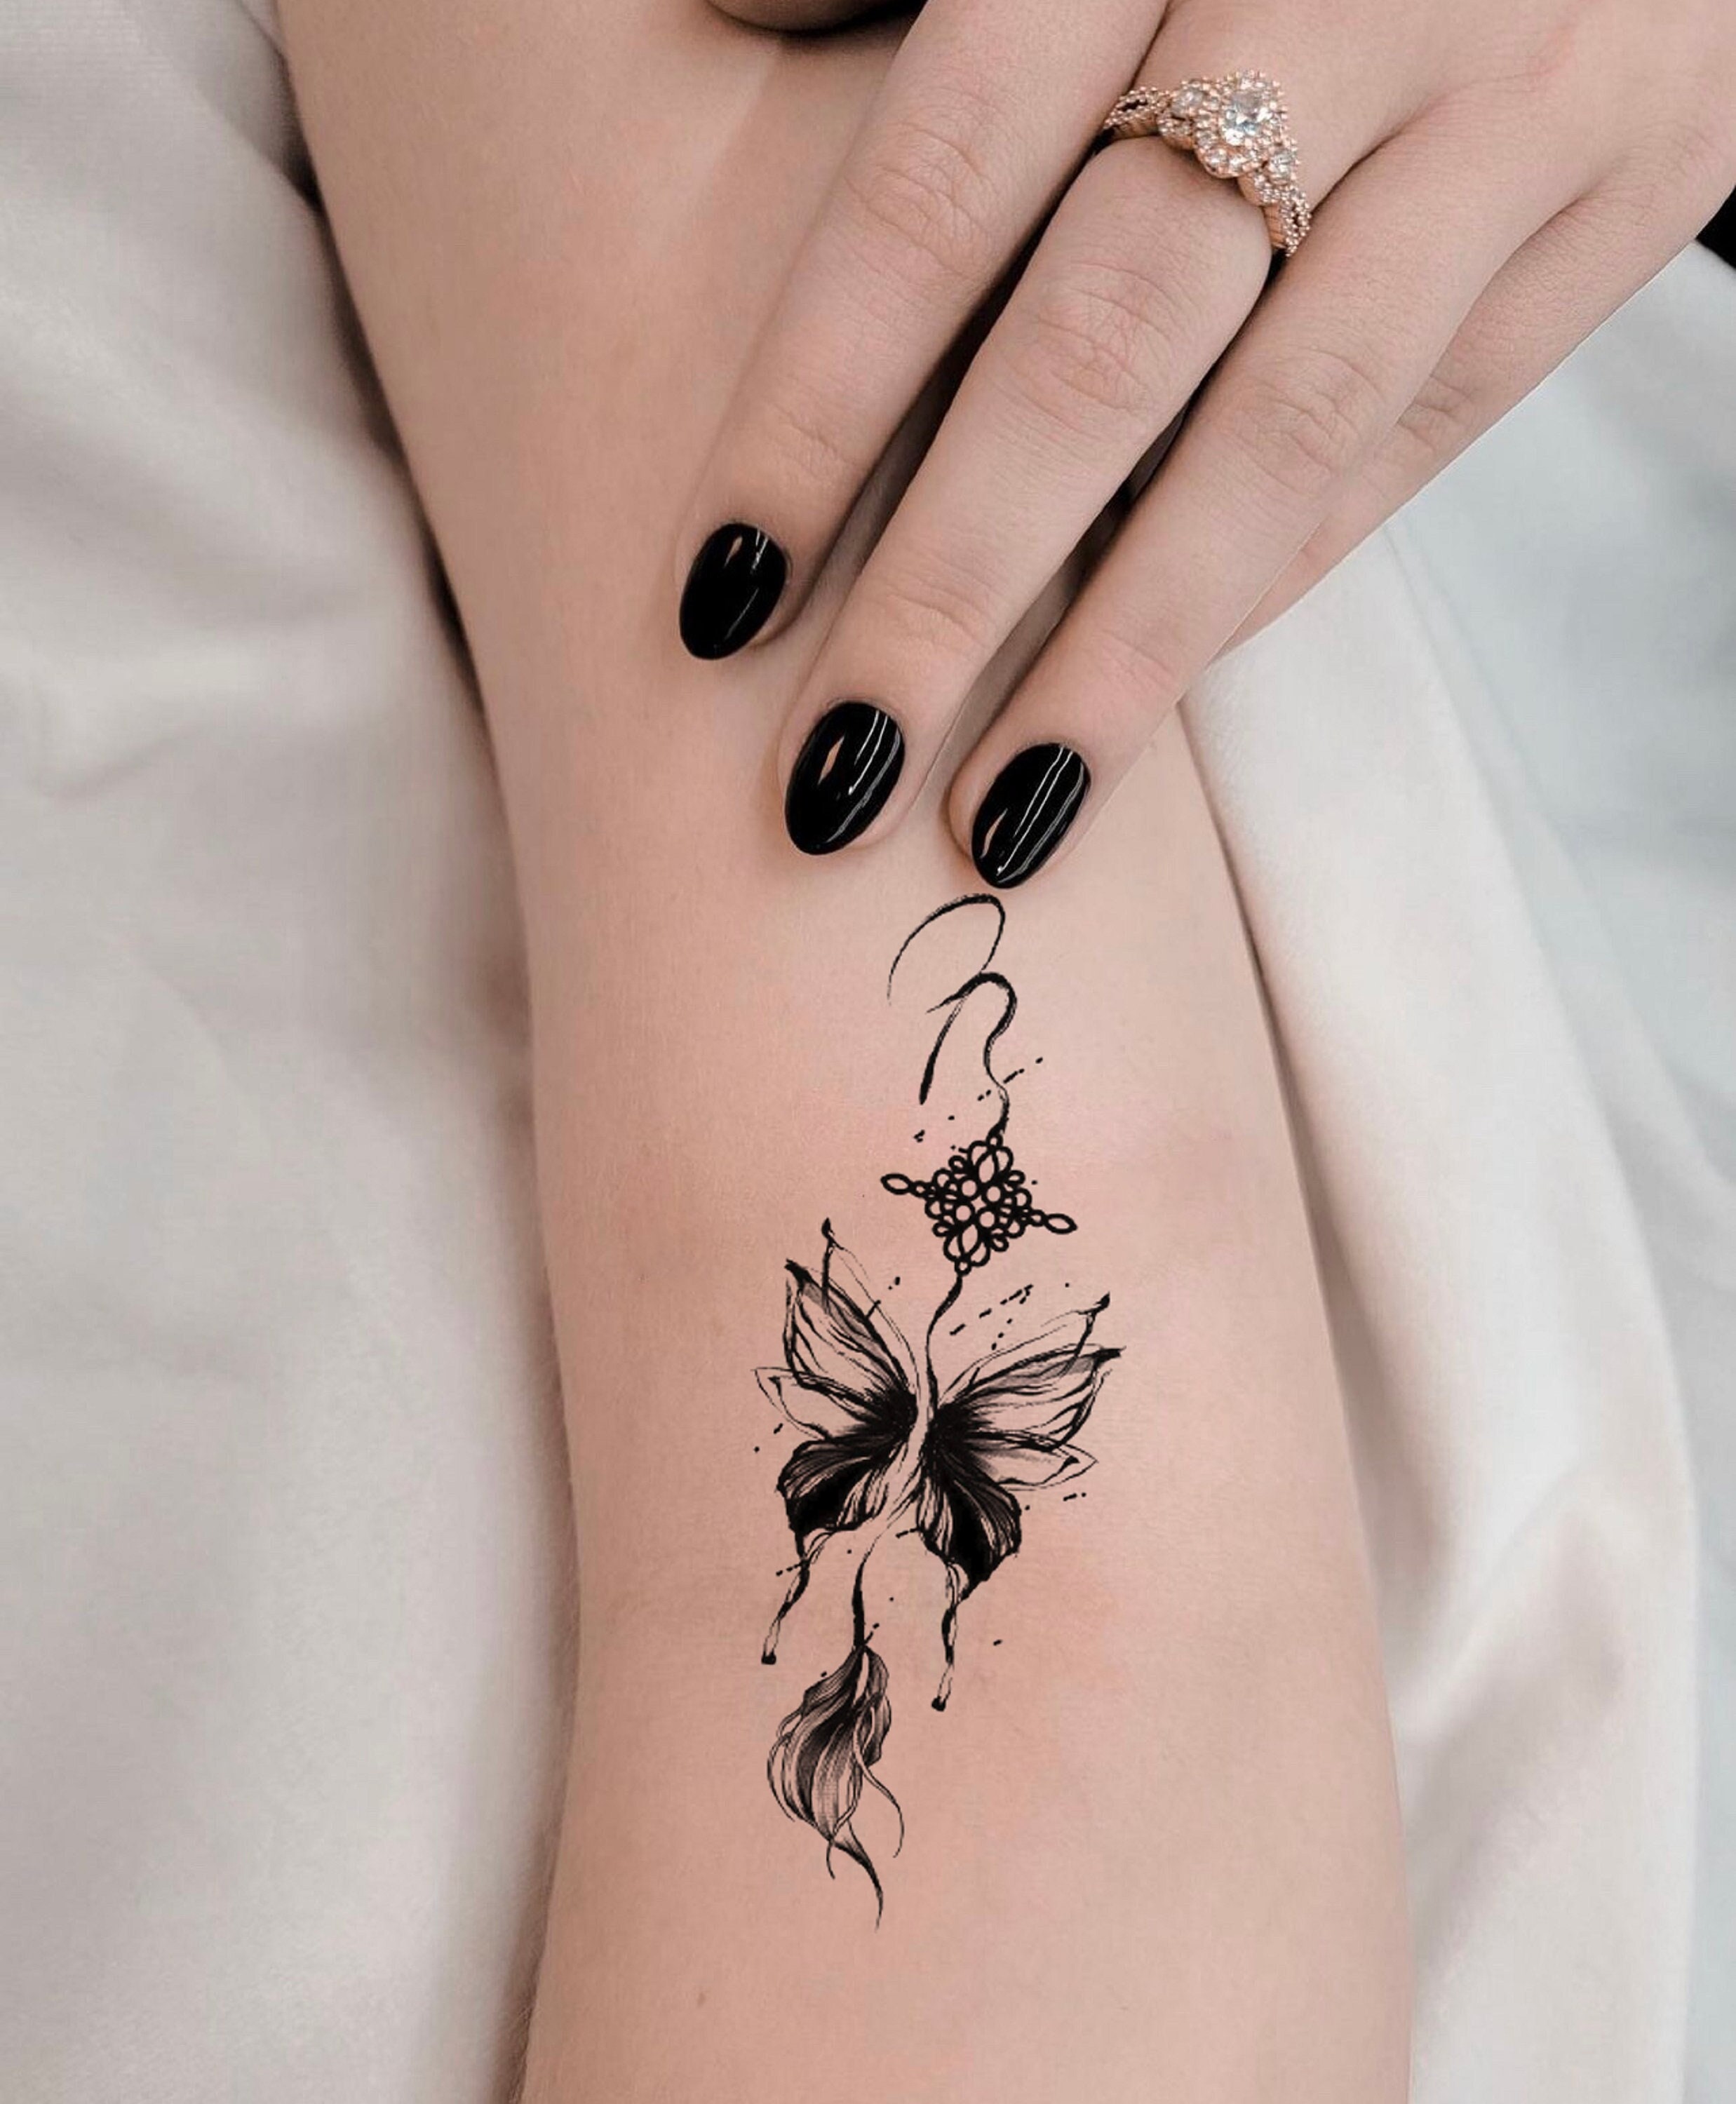 23 Adorable Small Butterfly Tattoo Ideas For Women - Styleoholic